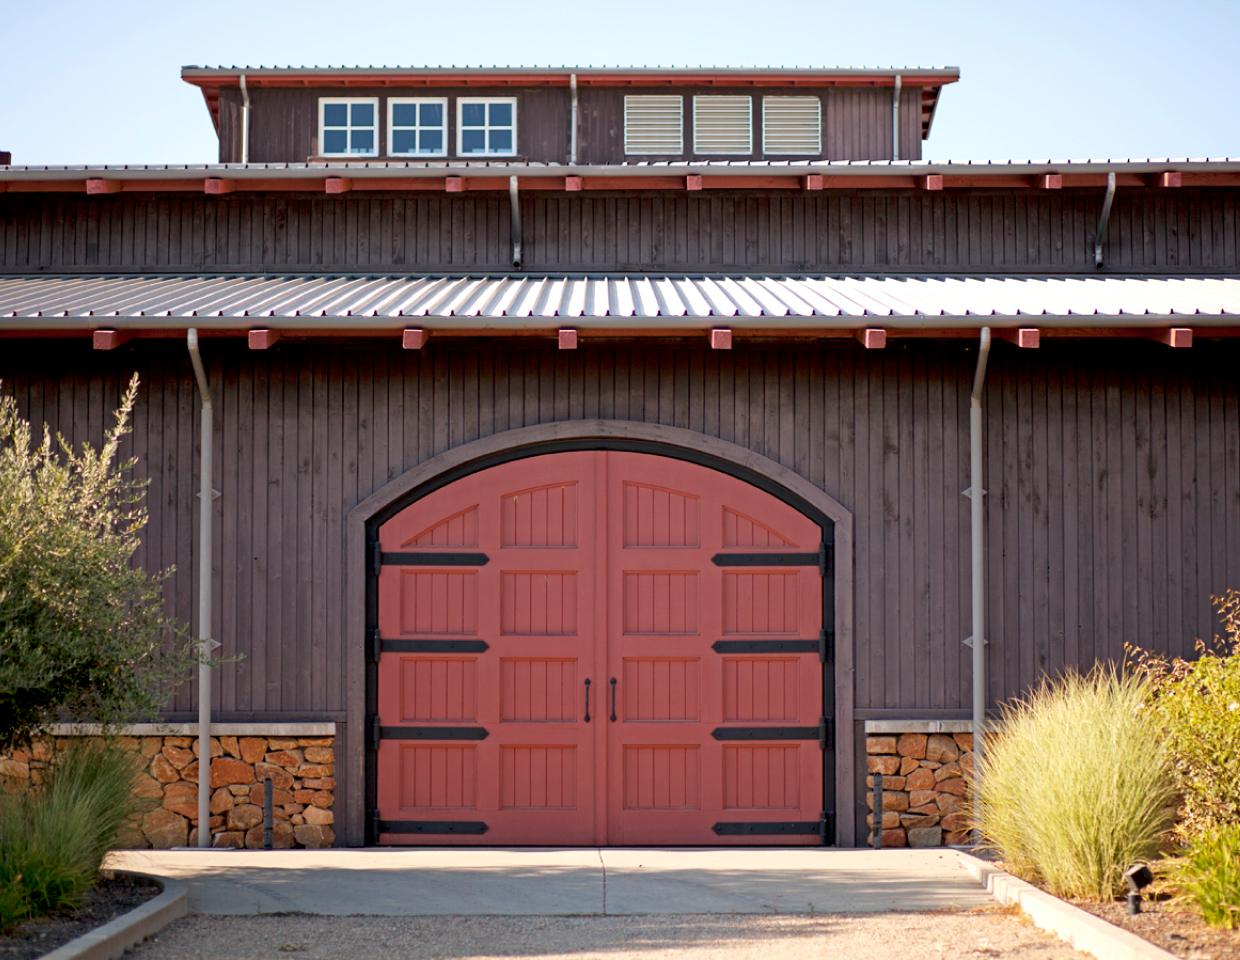 Terra d'Oro winery brown building with red doors.